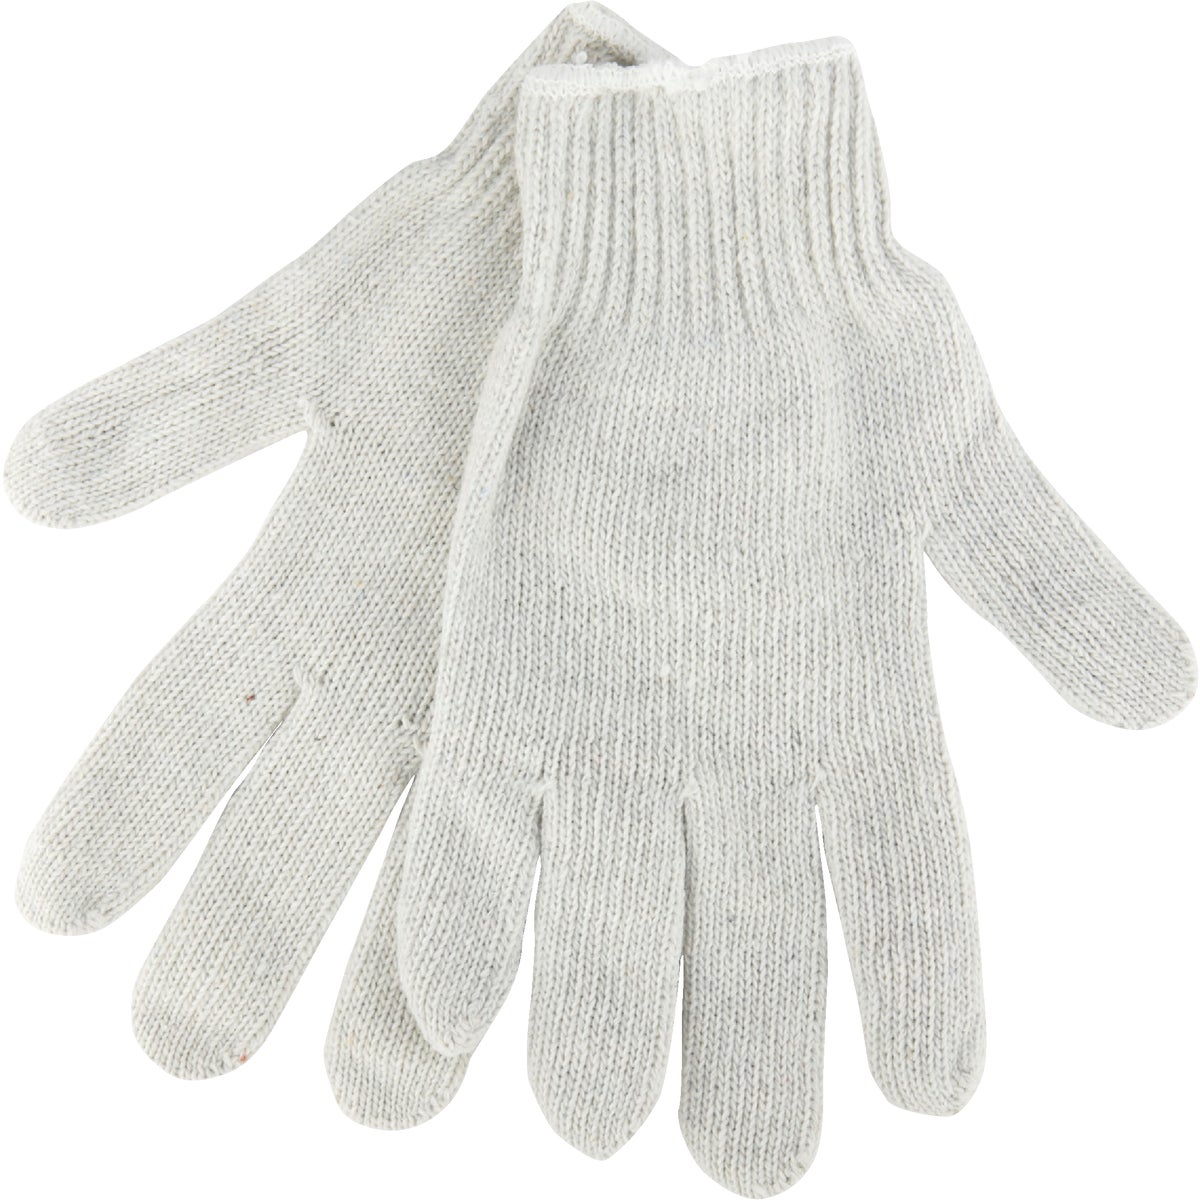 Item 759753, 100% polyester knit glove featuring over-edged elasticized knit wrist.